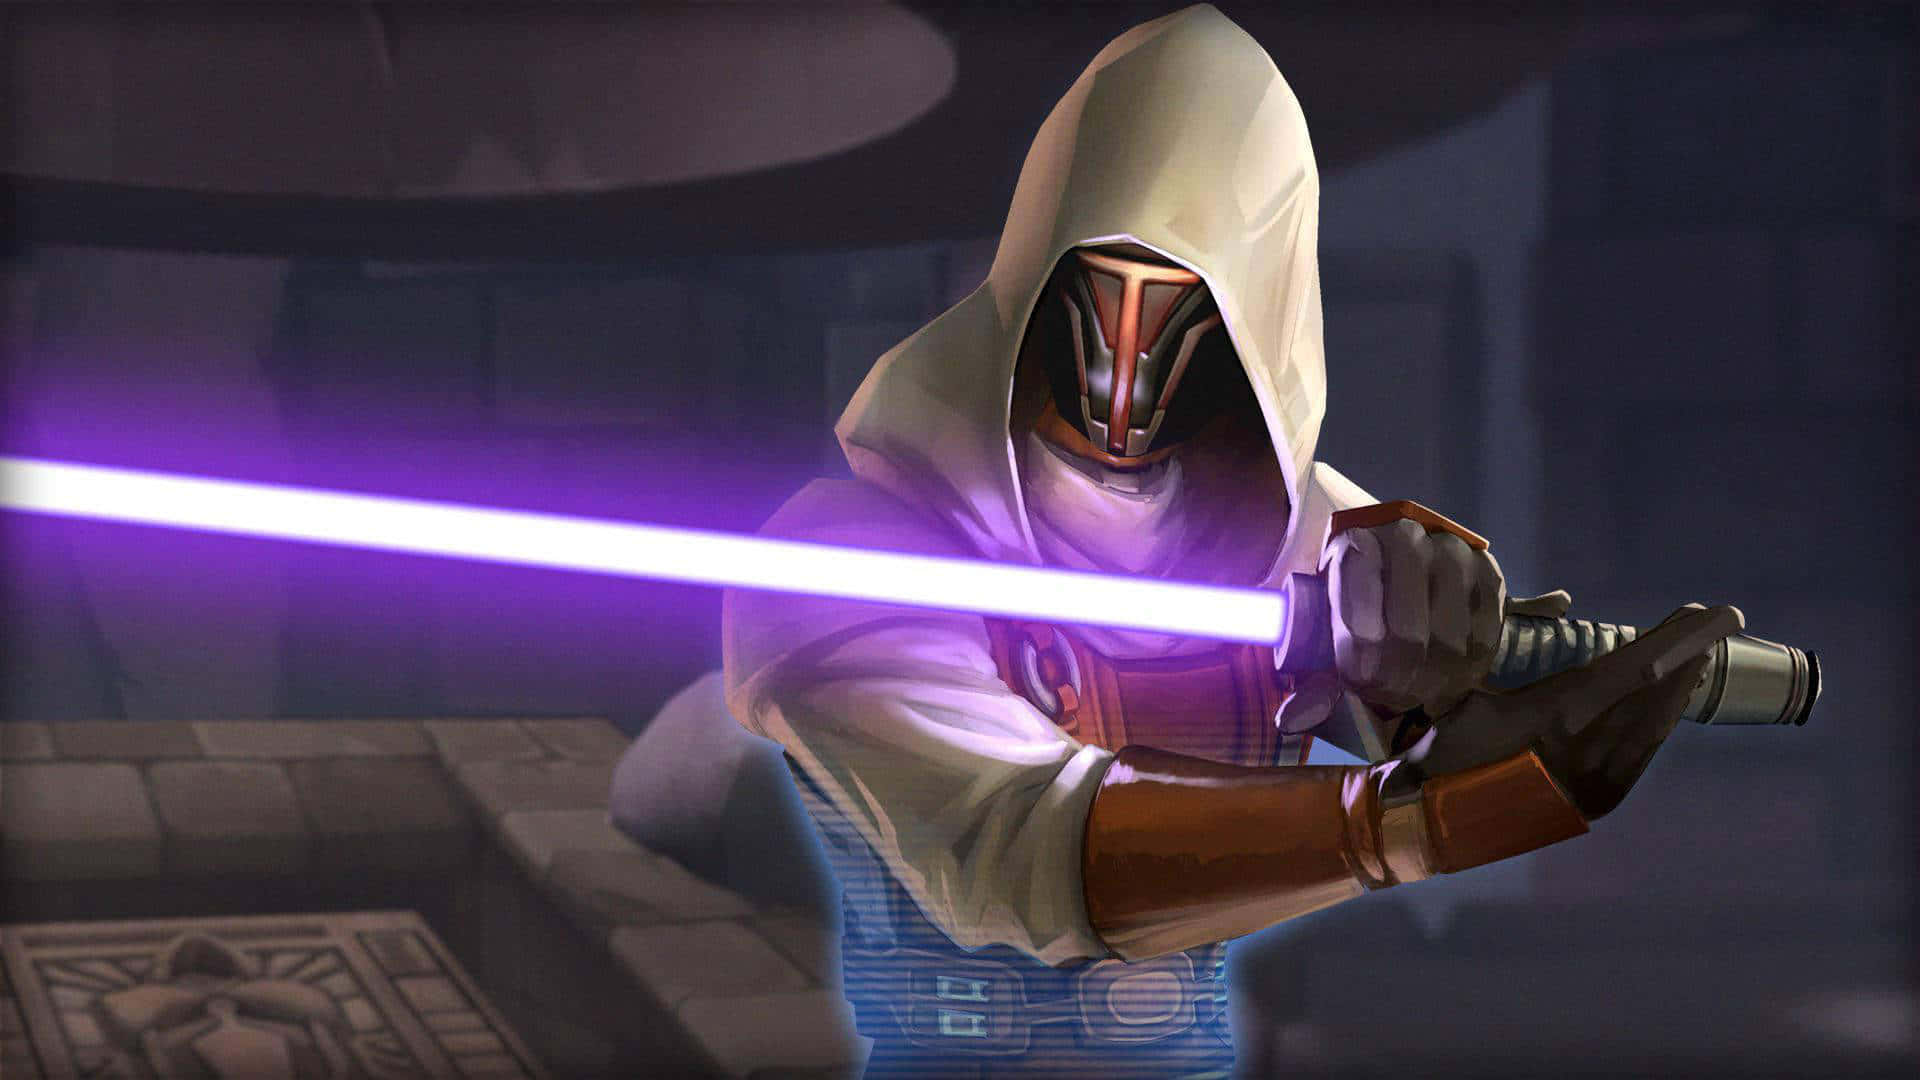 Jedi Knight ready to face any challenge Wallpaper